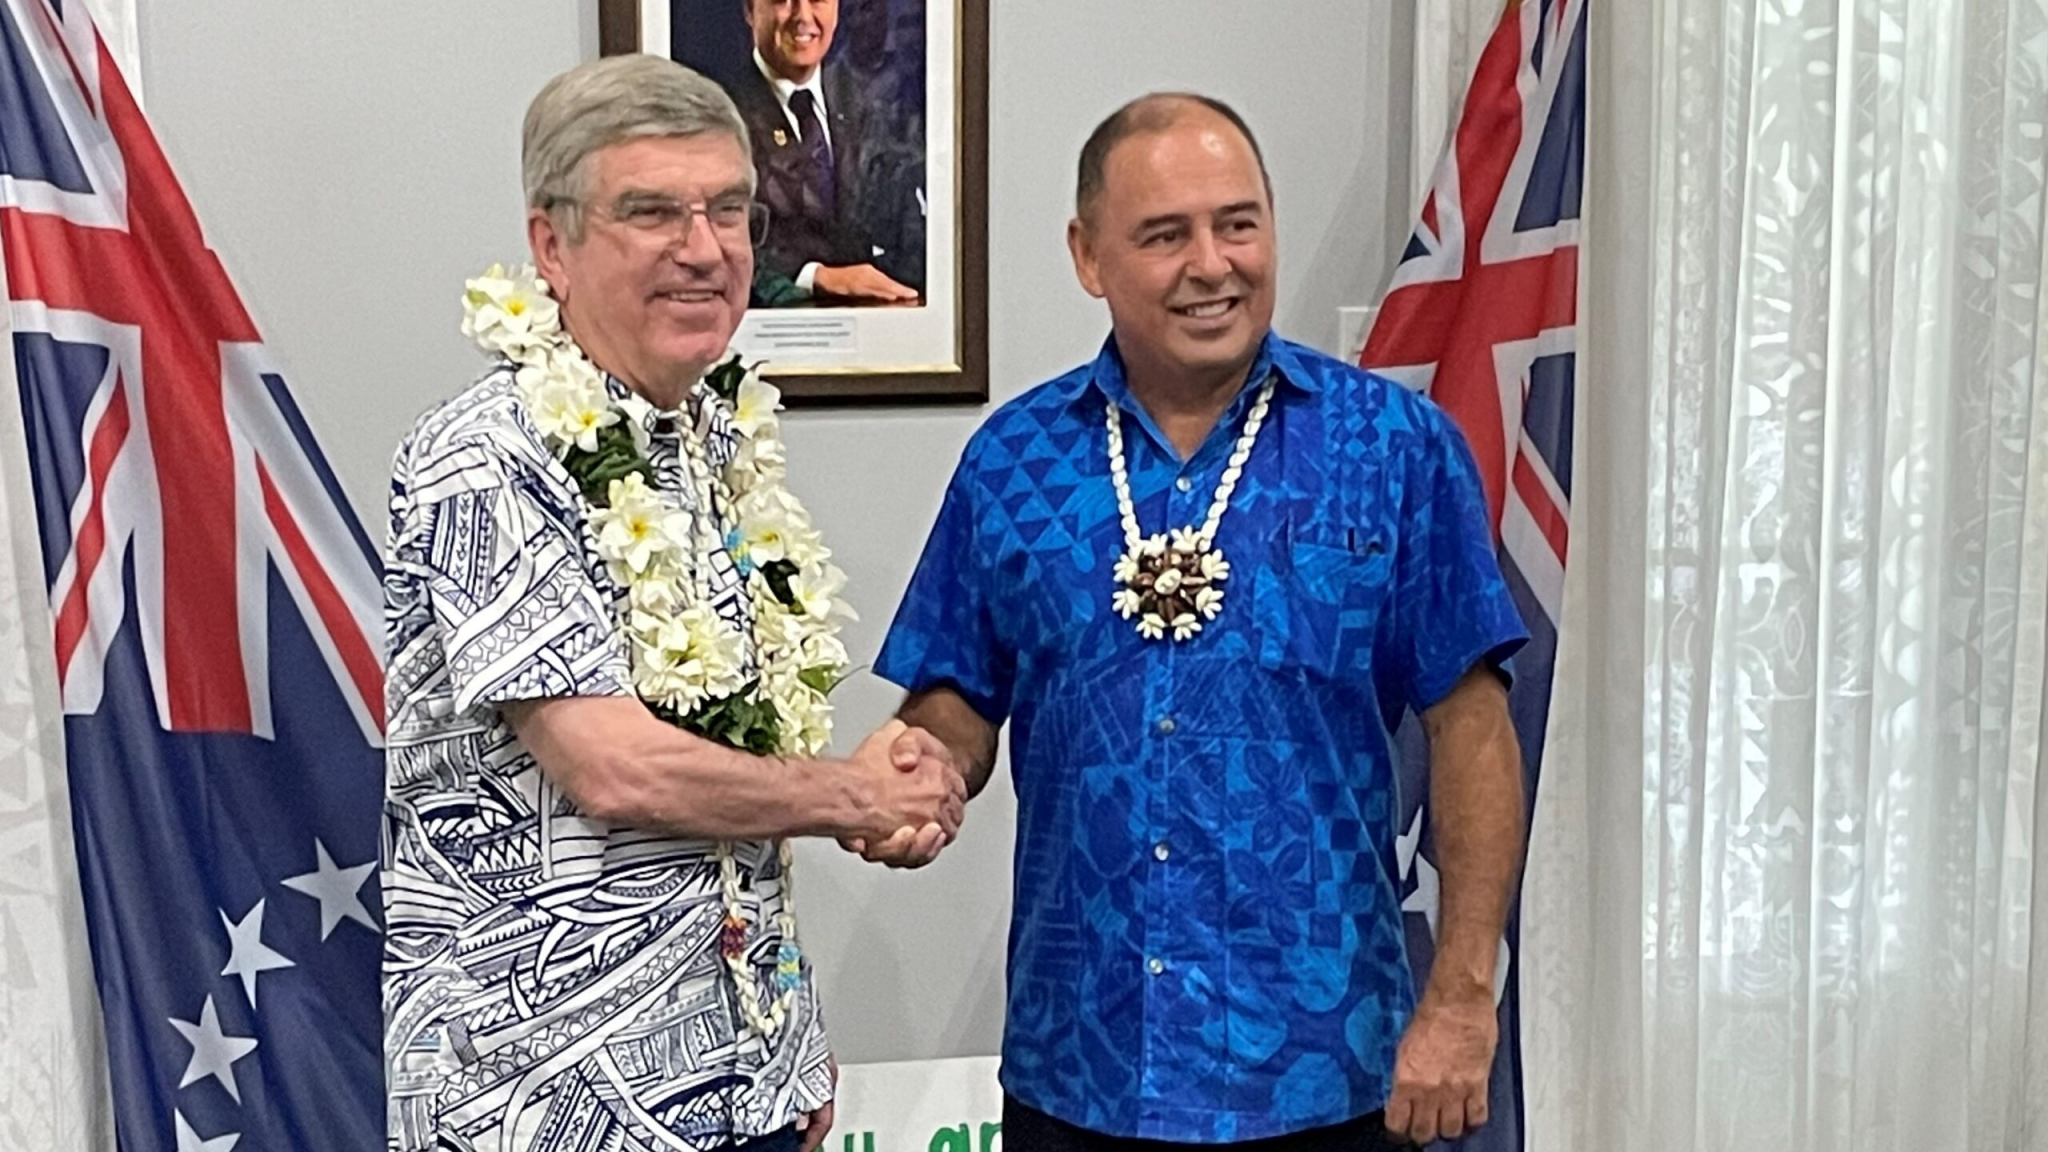 The visit of IOC President Thomas Bach, left, to the Cook Islands was a highlight of 2022, the CISNOC said in its annual report ©IOC